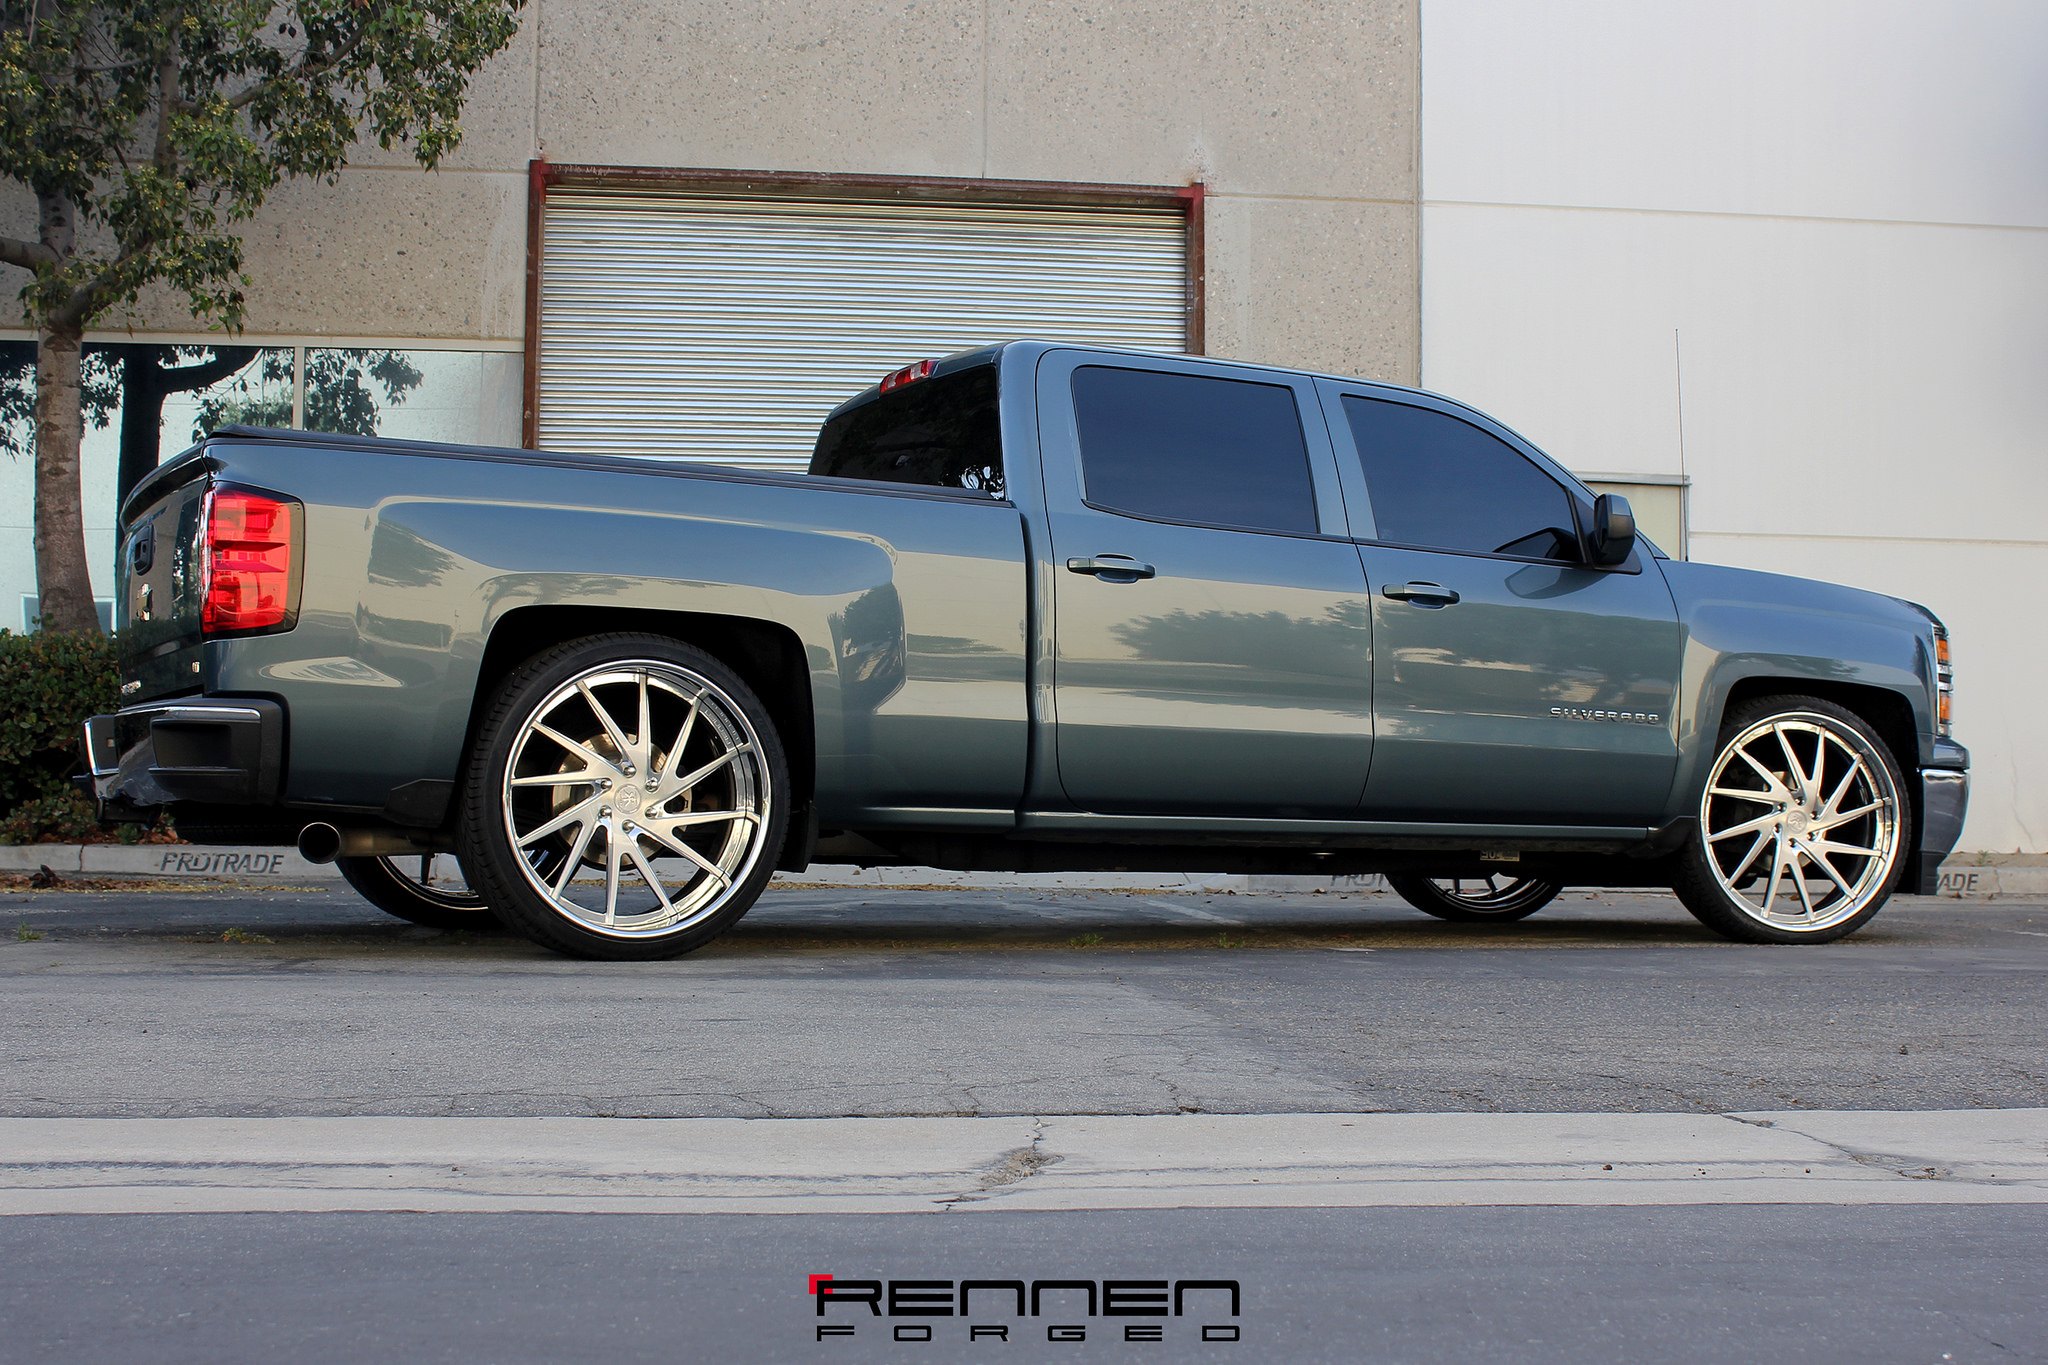 Red LED Taillights on Gray Chevy Silverado - Photo by Rennen International